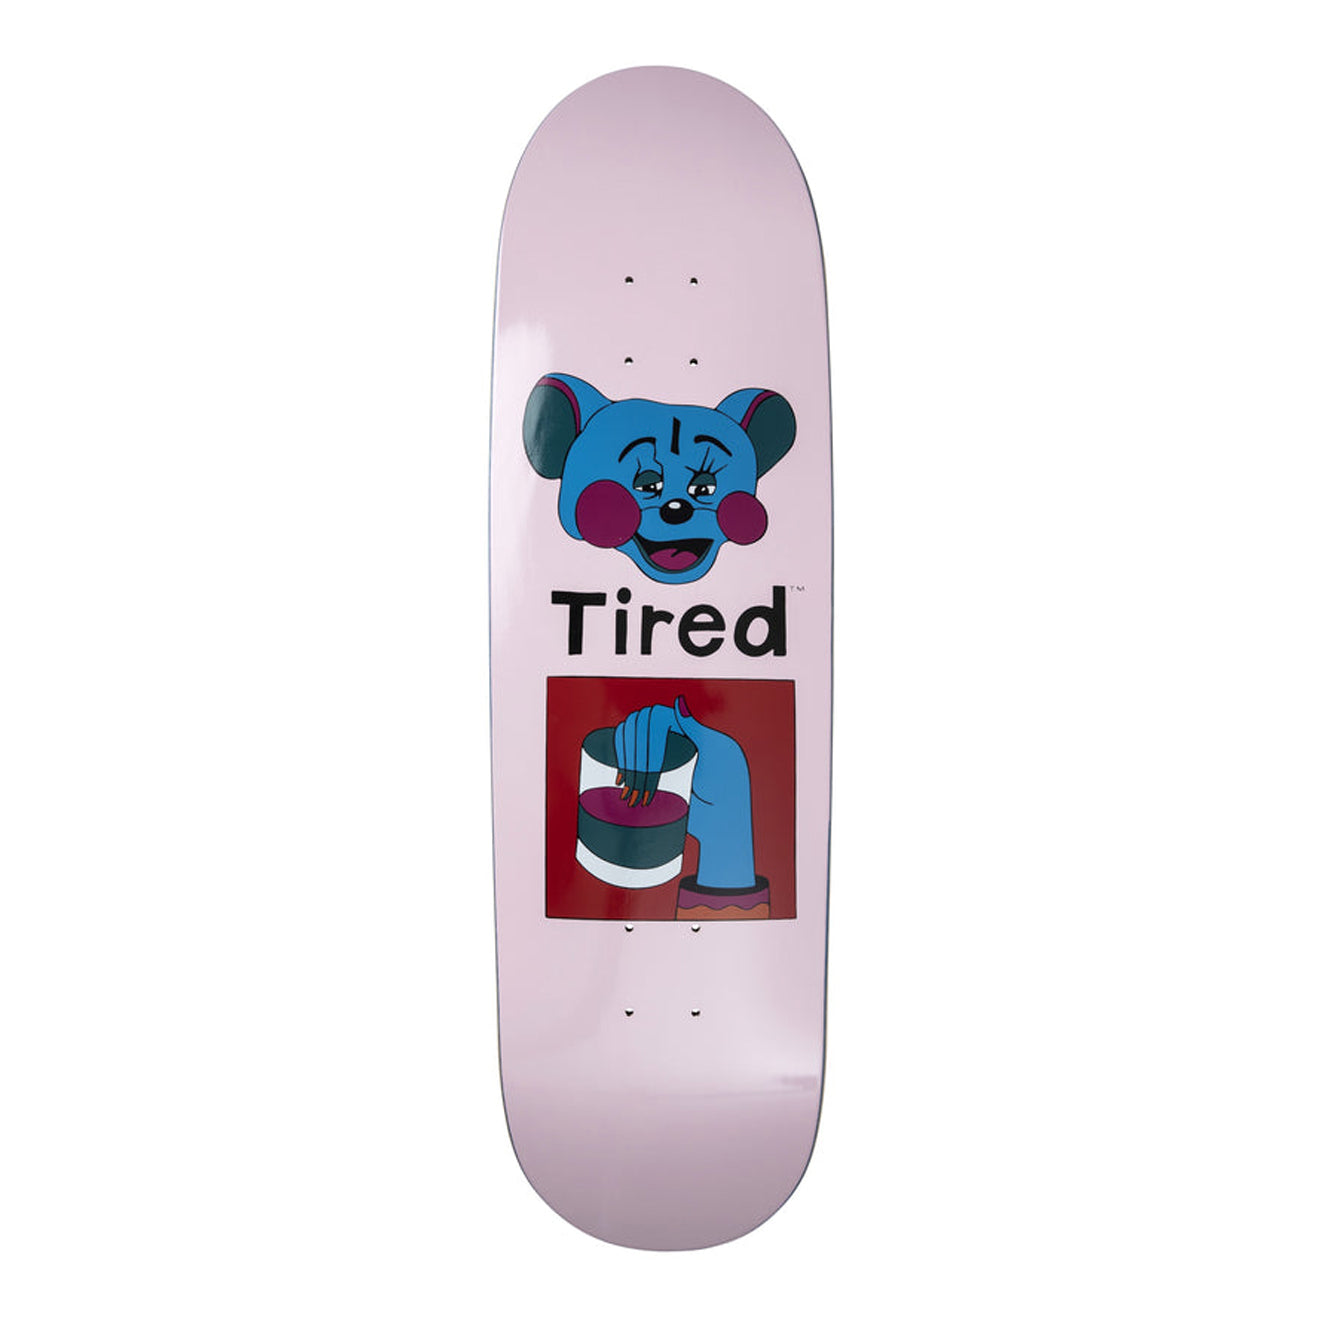 Tipsy Mouse Board - 8.75"